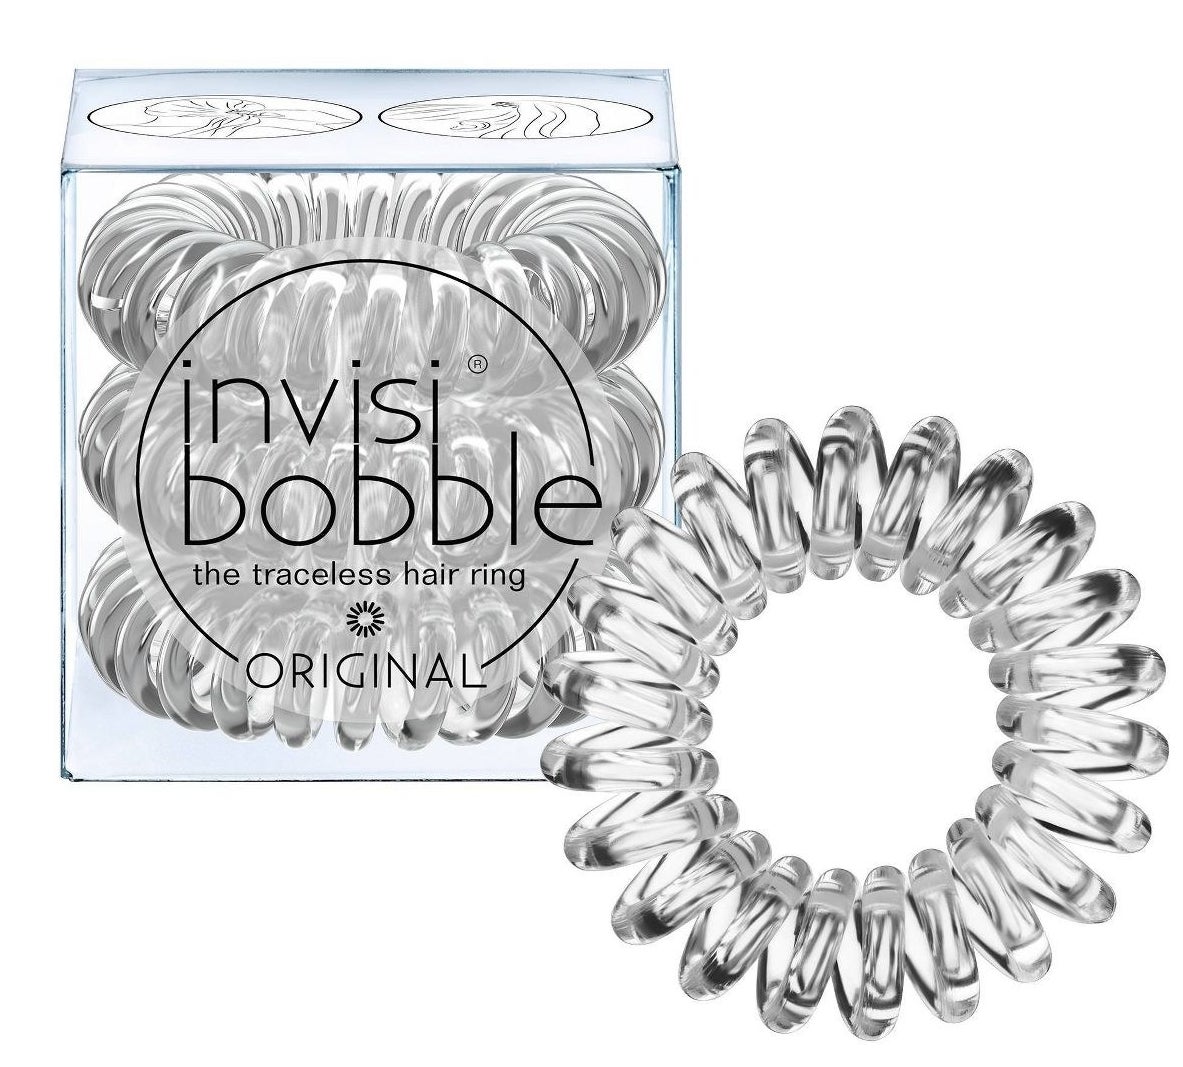 The clear spiral hair ties in their packaging